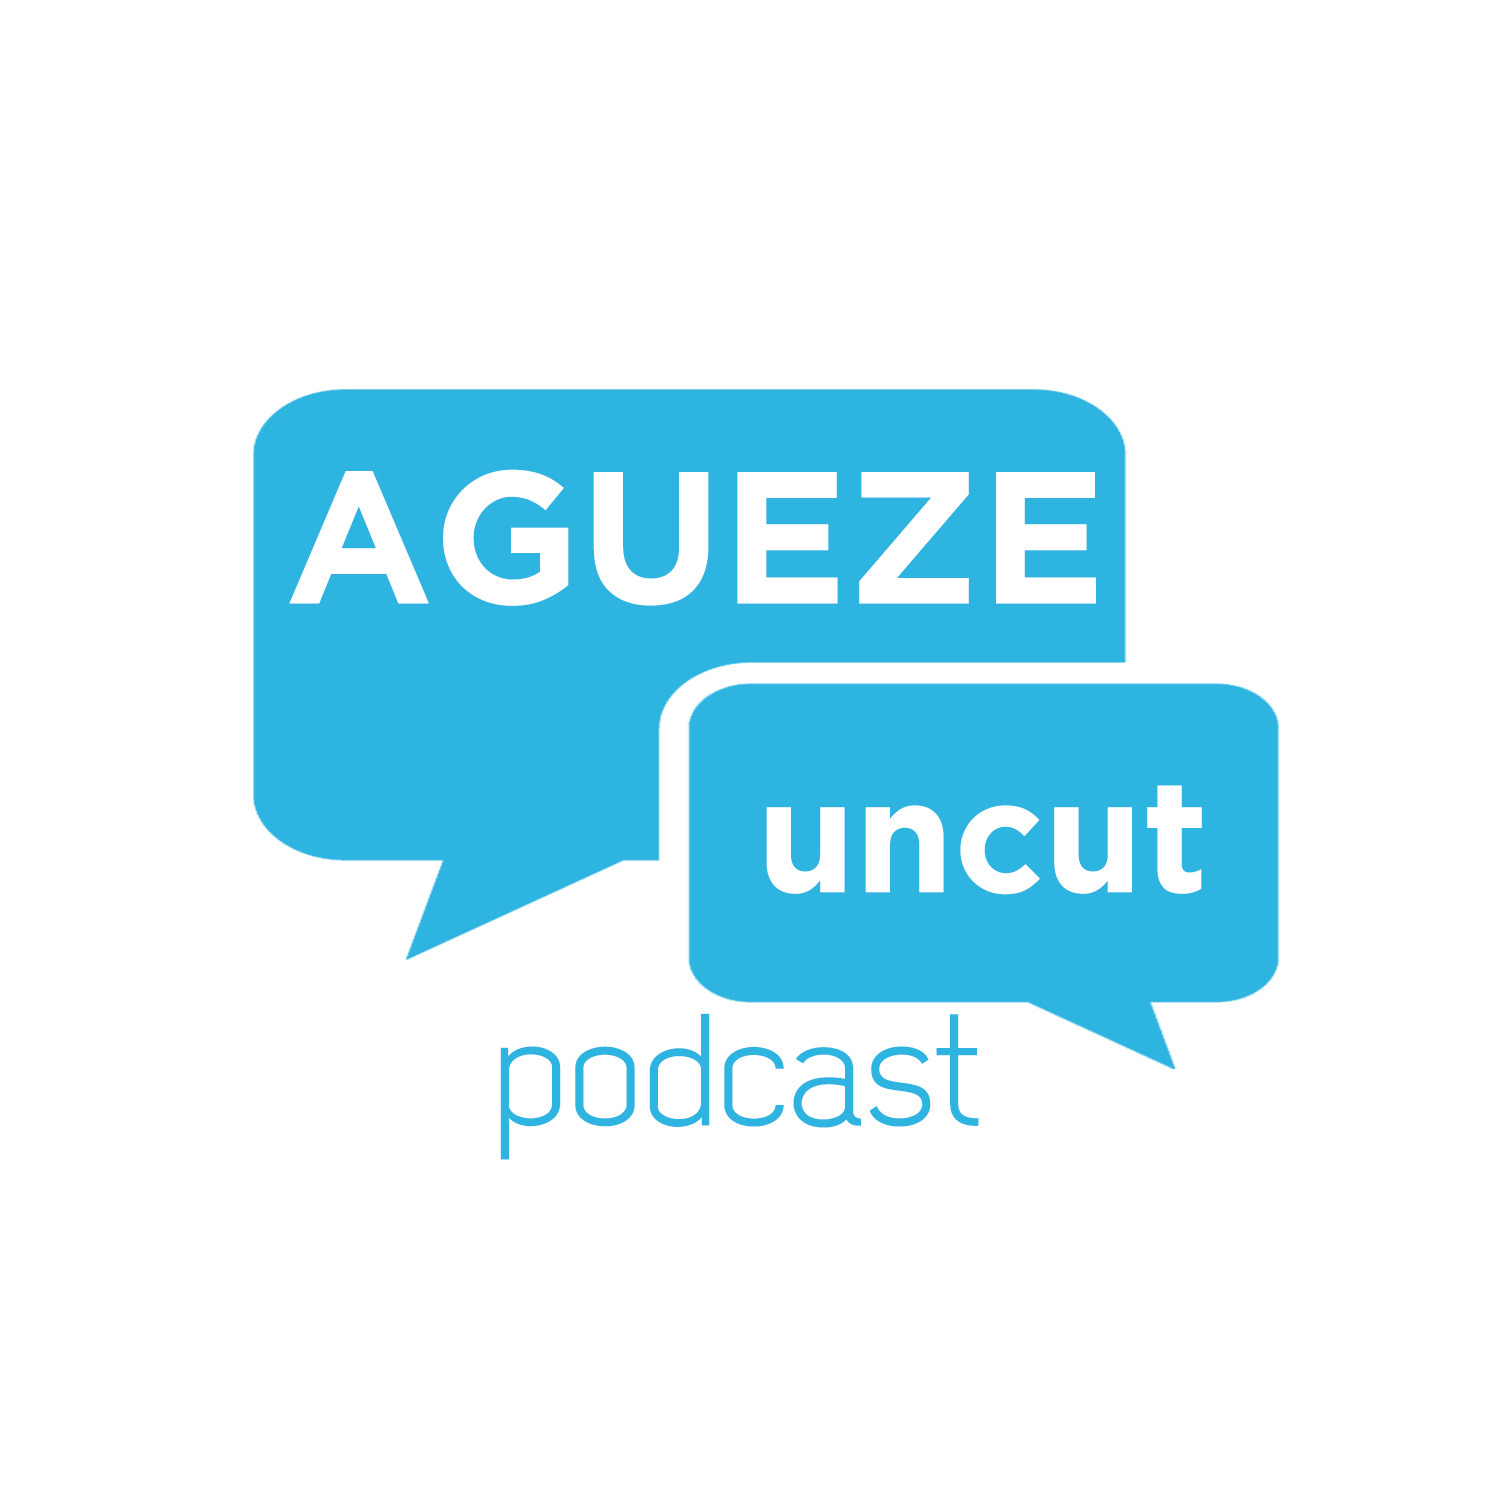 06 - Agueze Uncut - Holiday Traditions